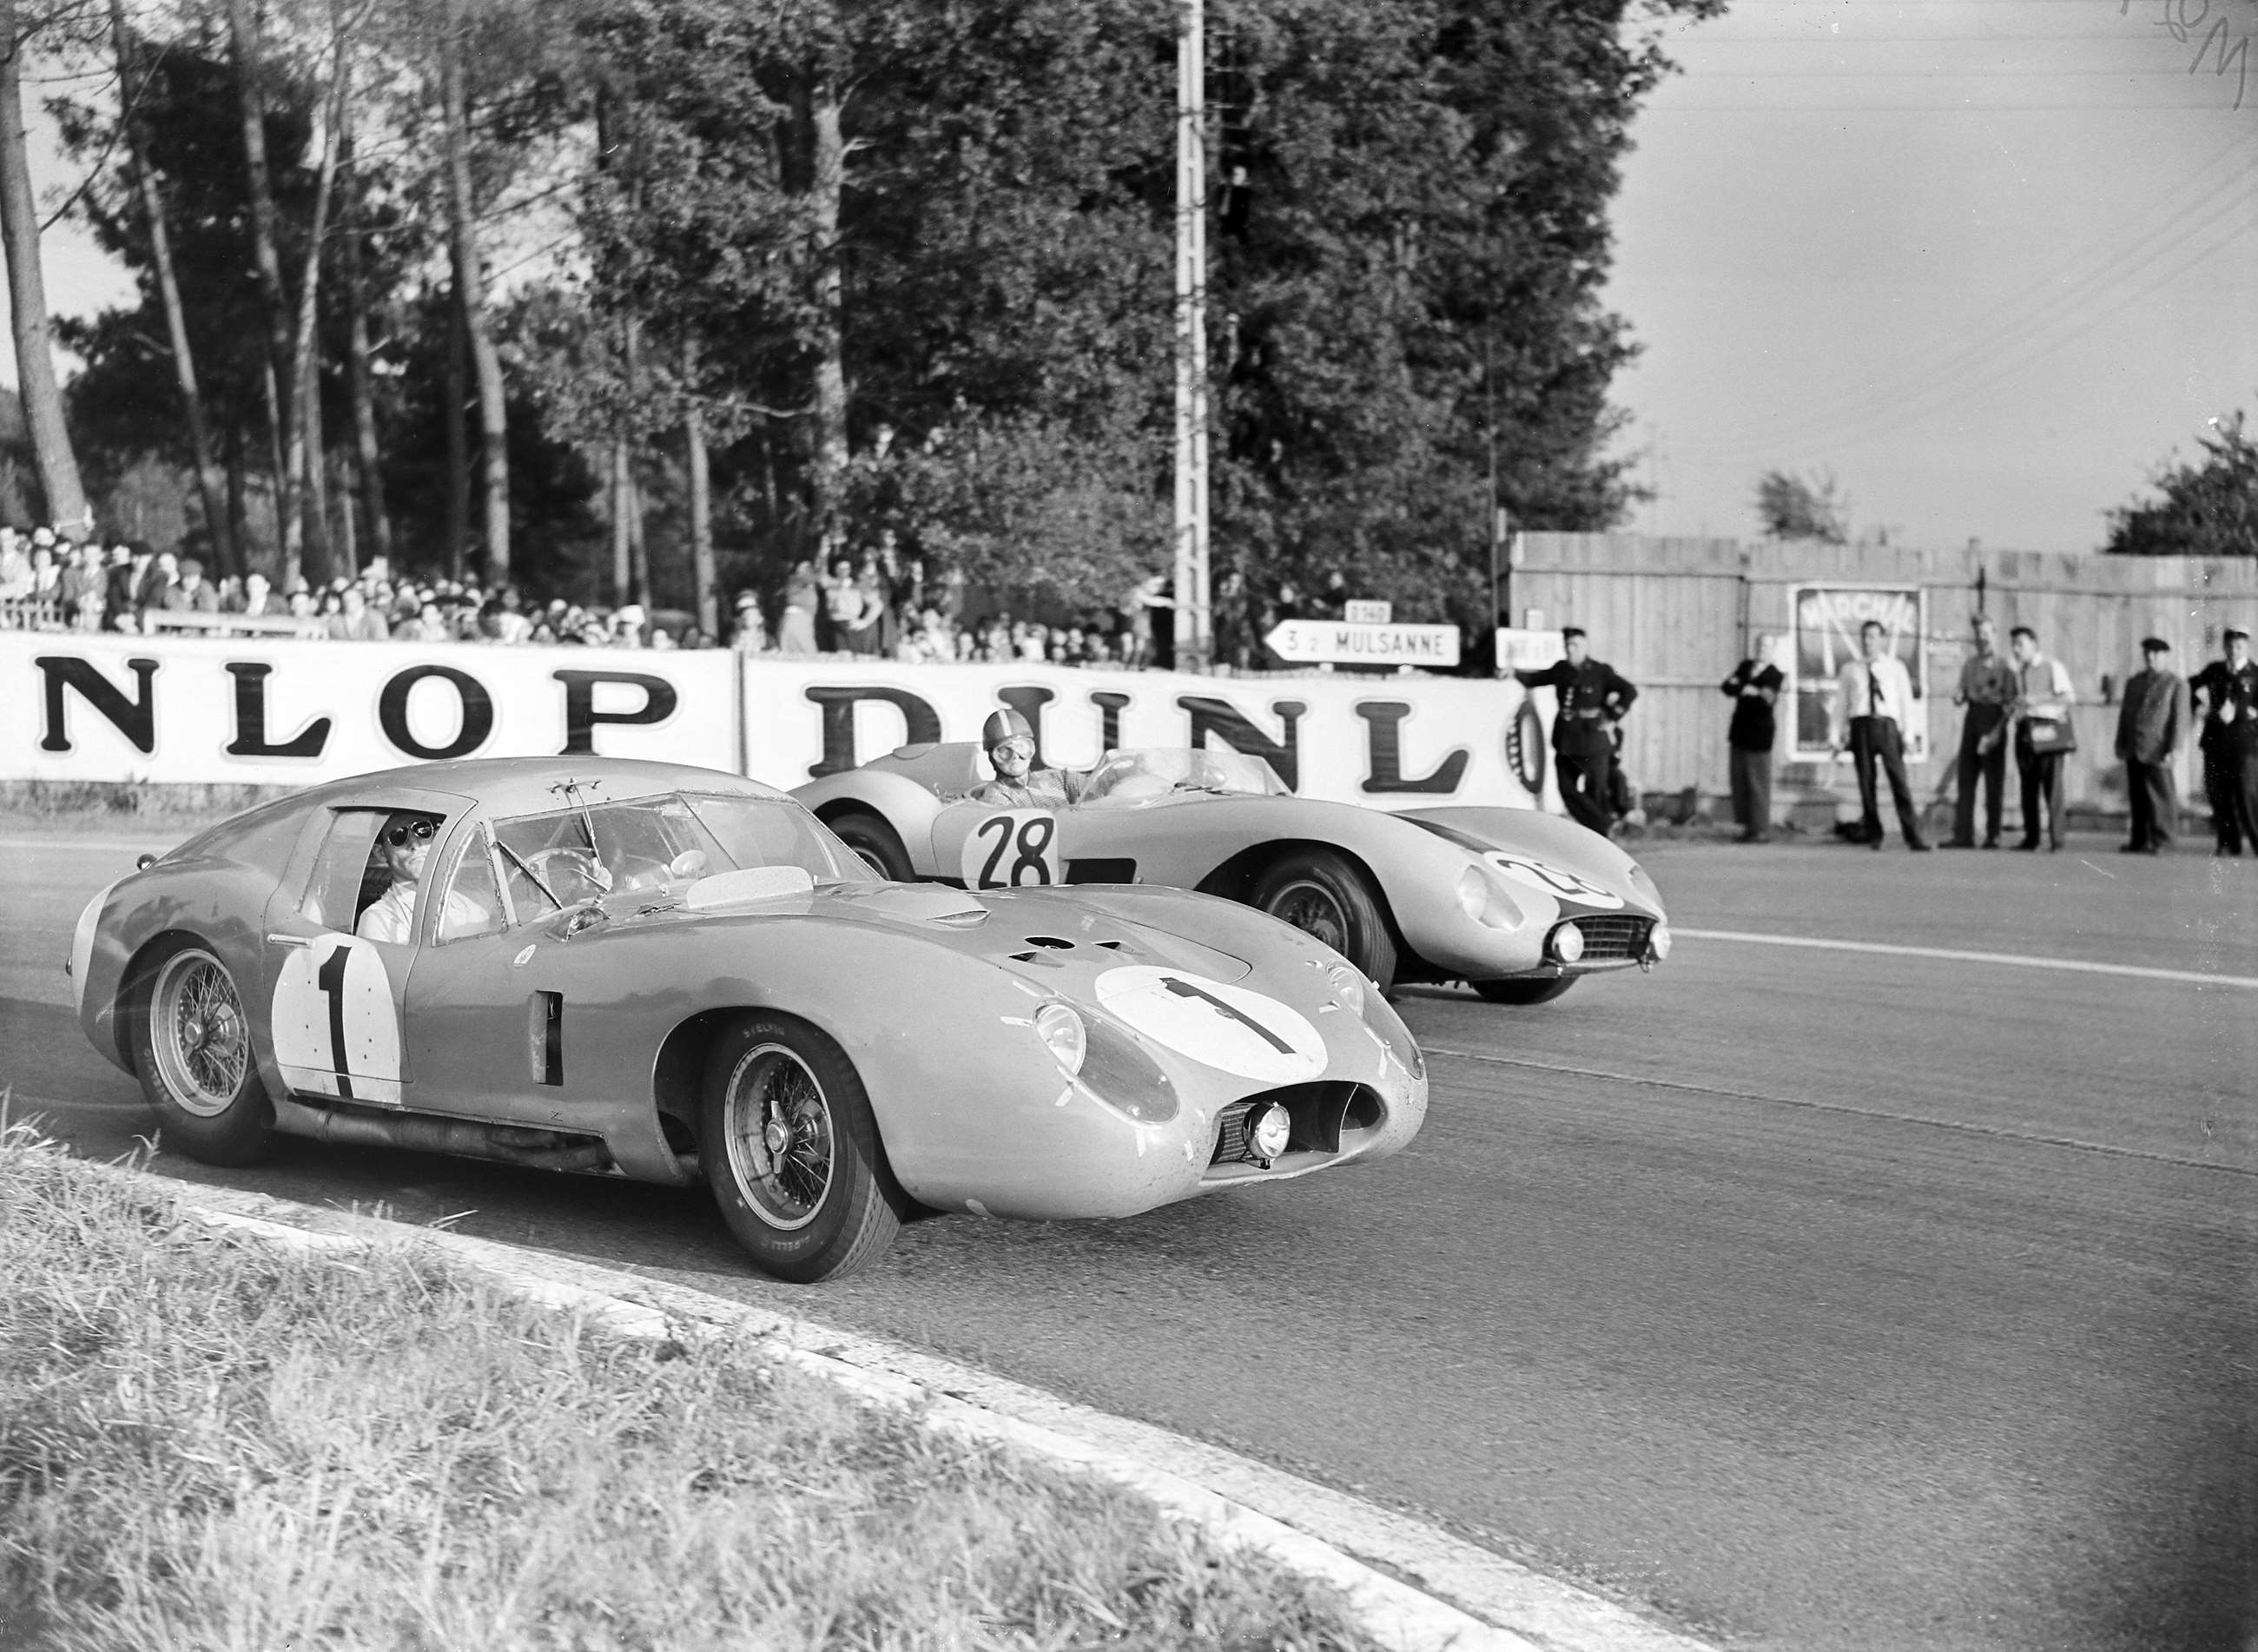 le-mans-1957-sir-stirling-moss-harry-schell-maserati-450s-zagato-coupe-lucien-bianchi-george-harris-ferrari-500-tr-c-motorsport-images-goodwood-07062019.jpg